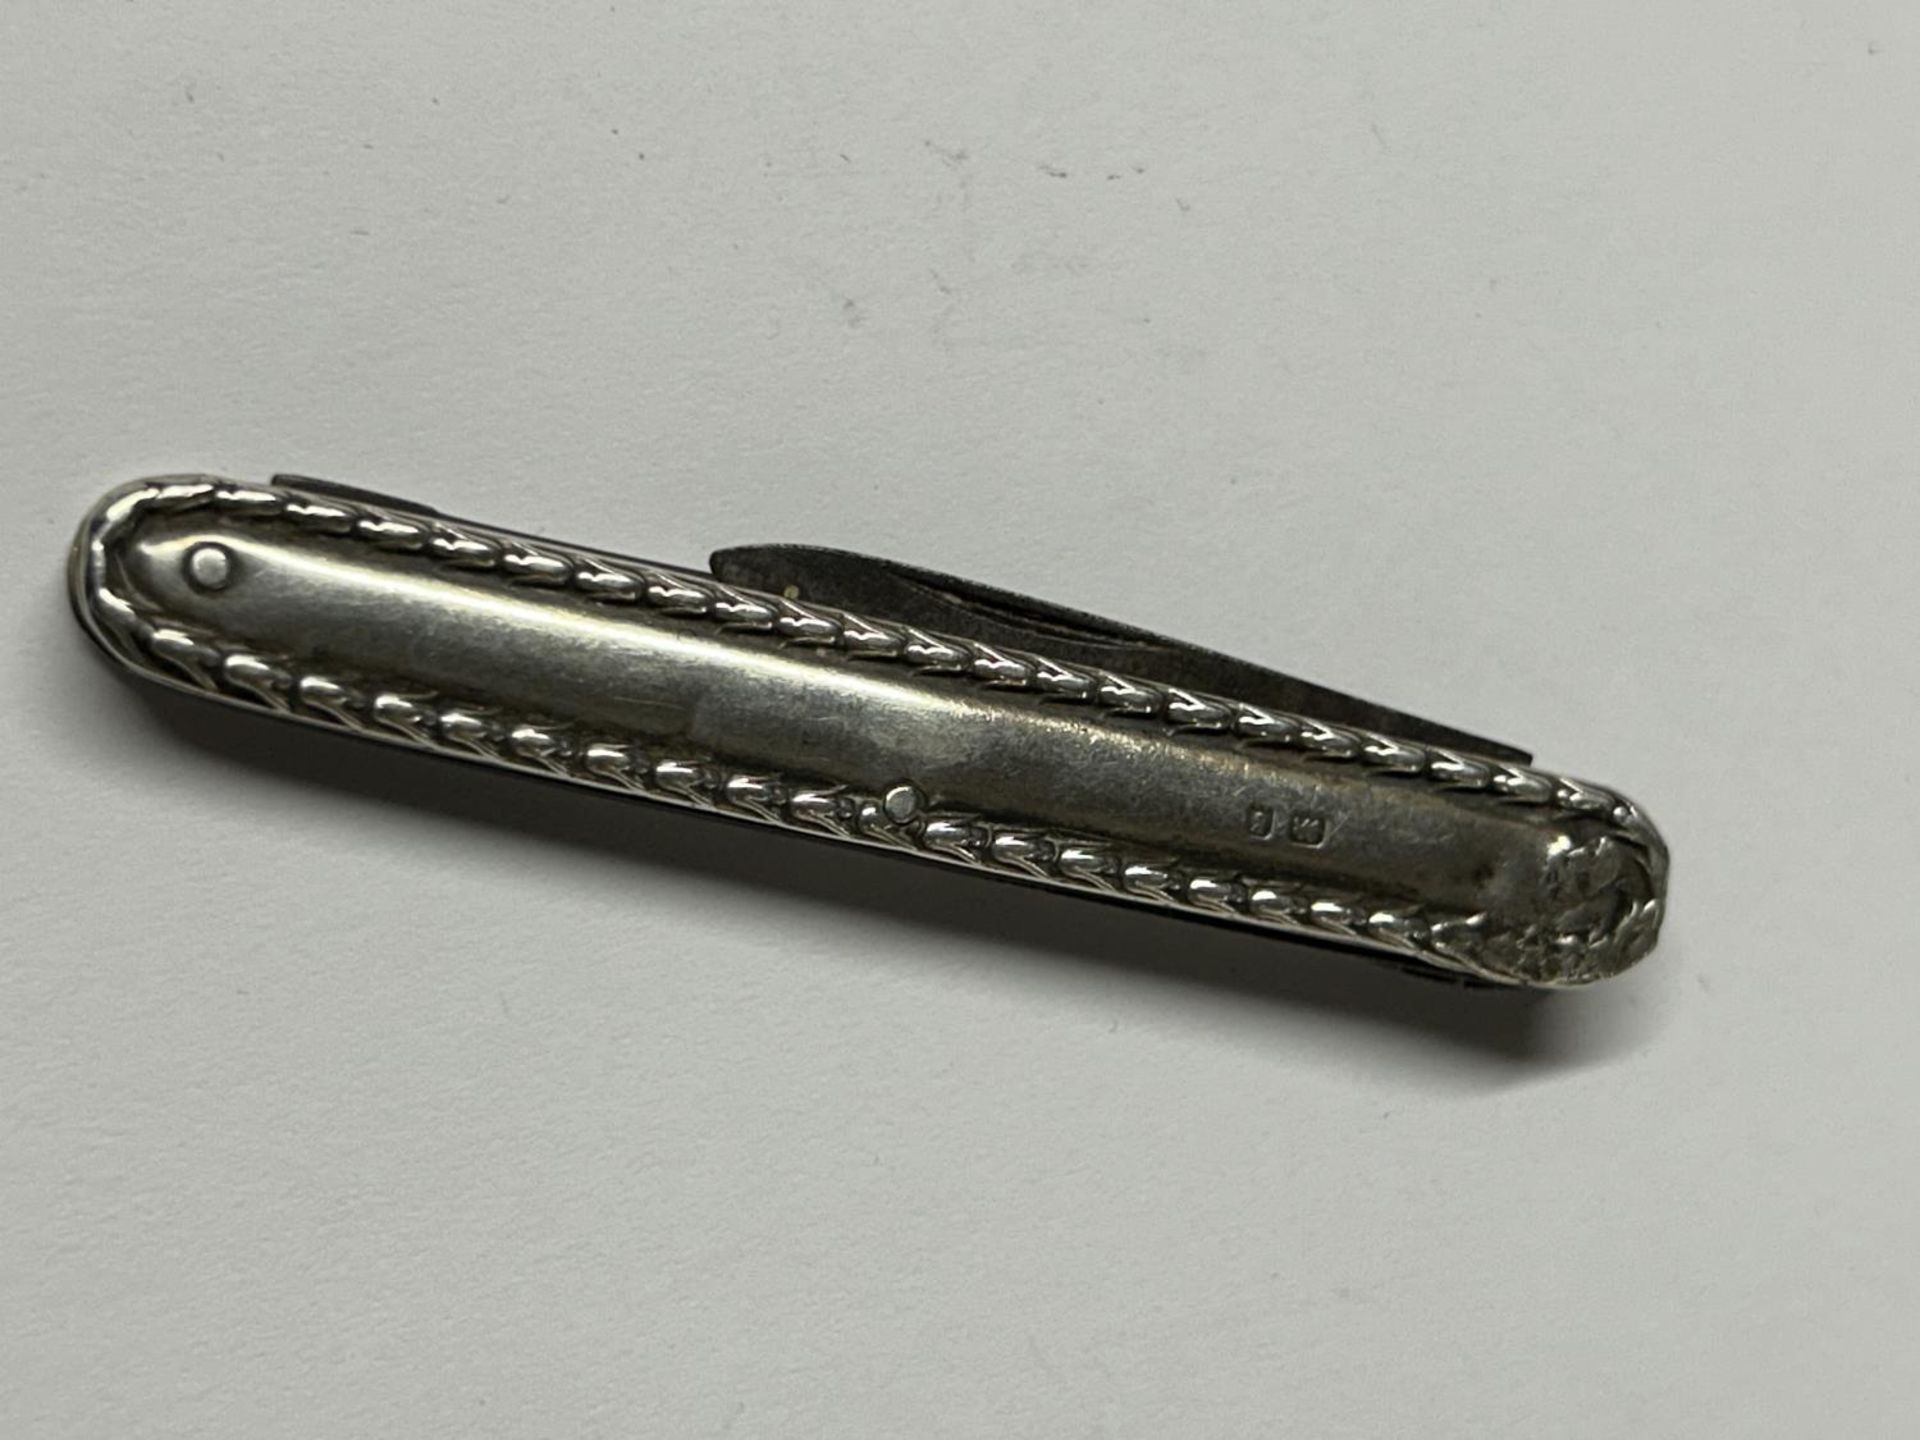 A HALLMARKED SILVER BIRMINGHAM PENKNIFE - Image 3 of 3